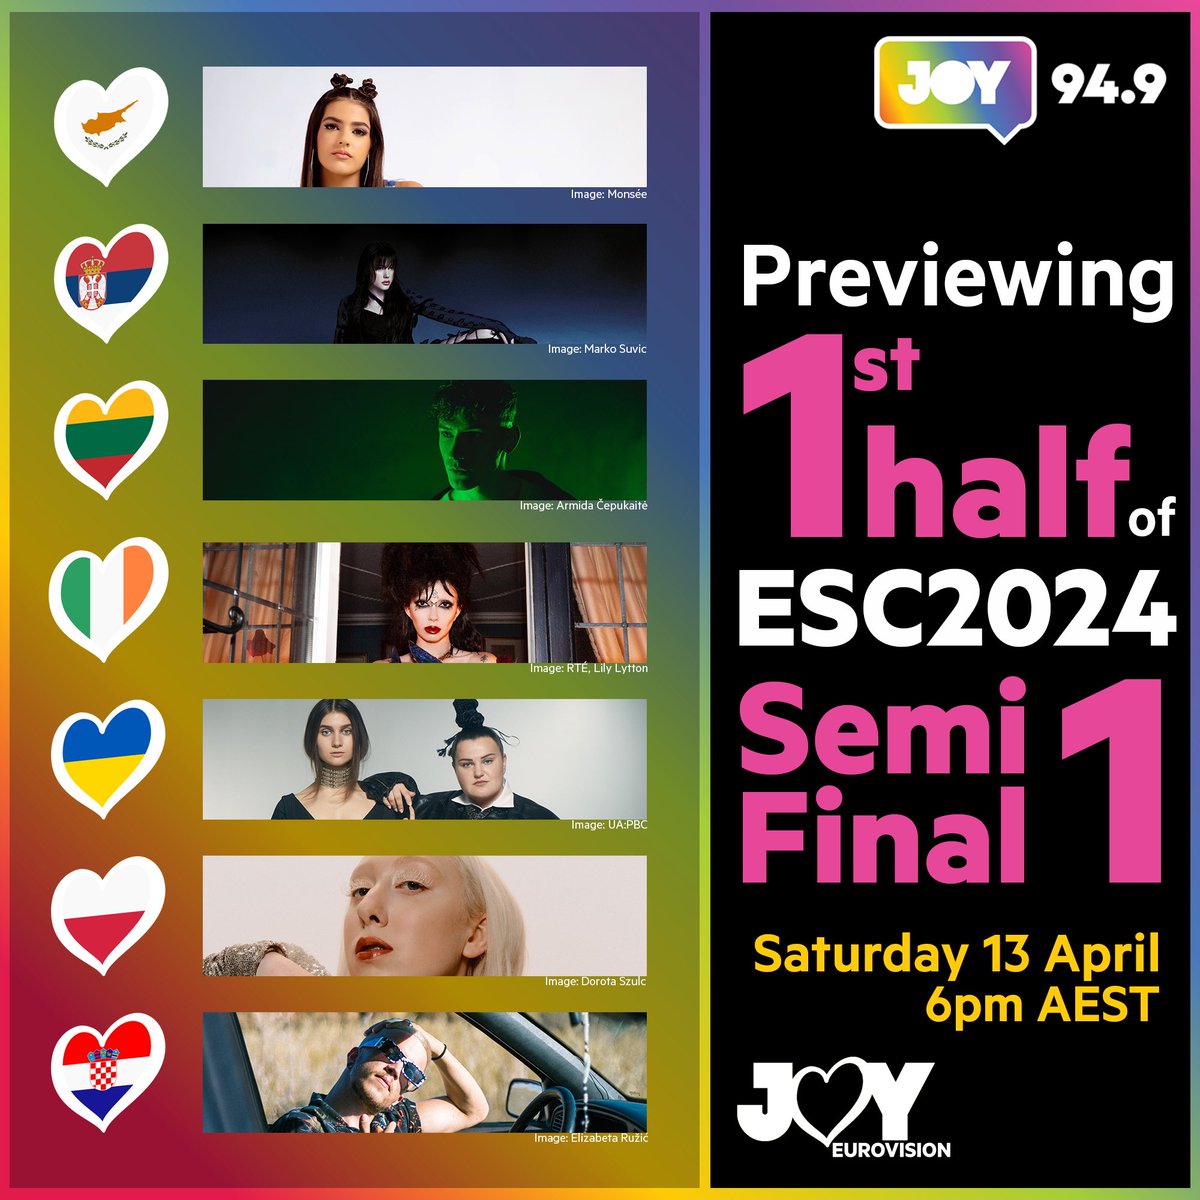 We’re ready to be #UnitedByMusic as we preview the first half of #ESC2024 Semi 1. Share your thoughts on 🇨🇾🇷🇸🇱🇹🇮🇪🇺🇦🇵🇱🇭🇷 in our first #Eurovision preview. Join us: ⏰ Sat 13 April, 6pm AEST (10am CEST) 📻 @JOY949 / 94.9FM in Melb 💻 joy.org.au 🔊 'Play JOY 949'